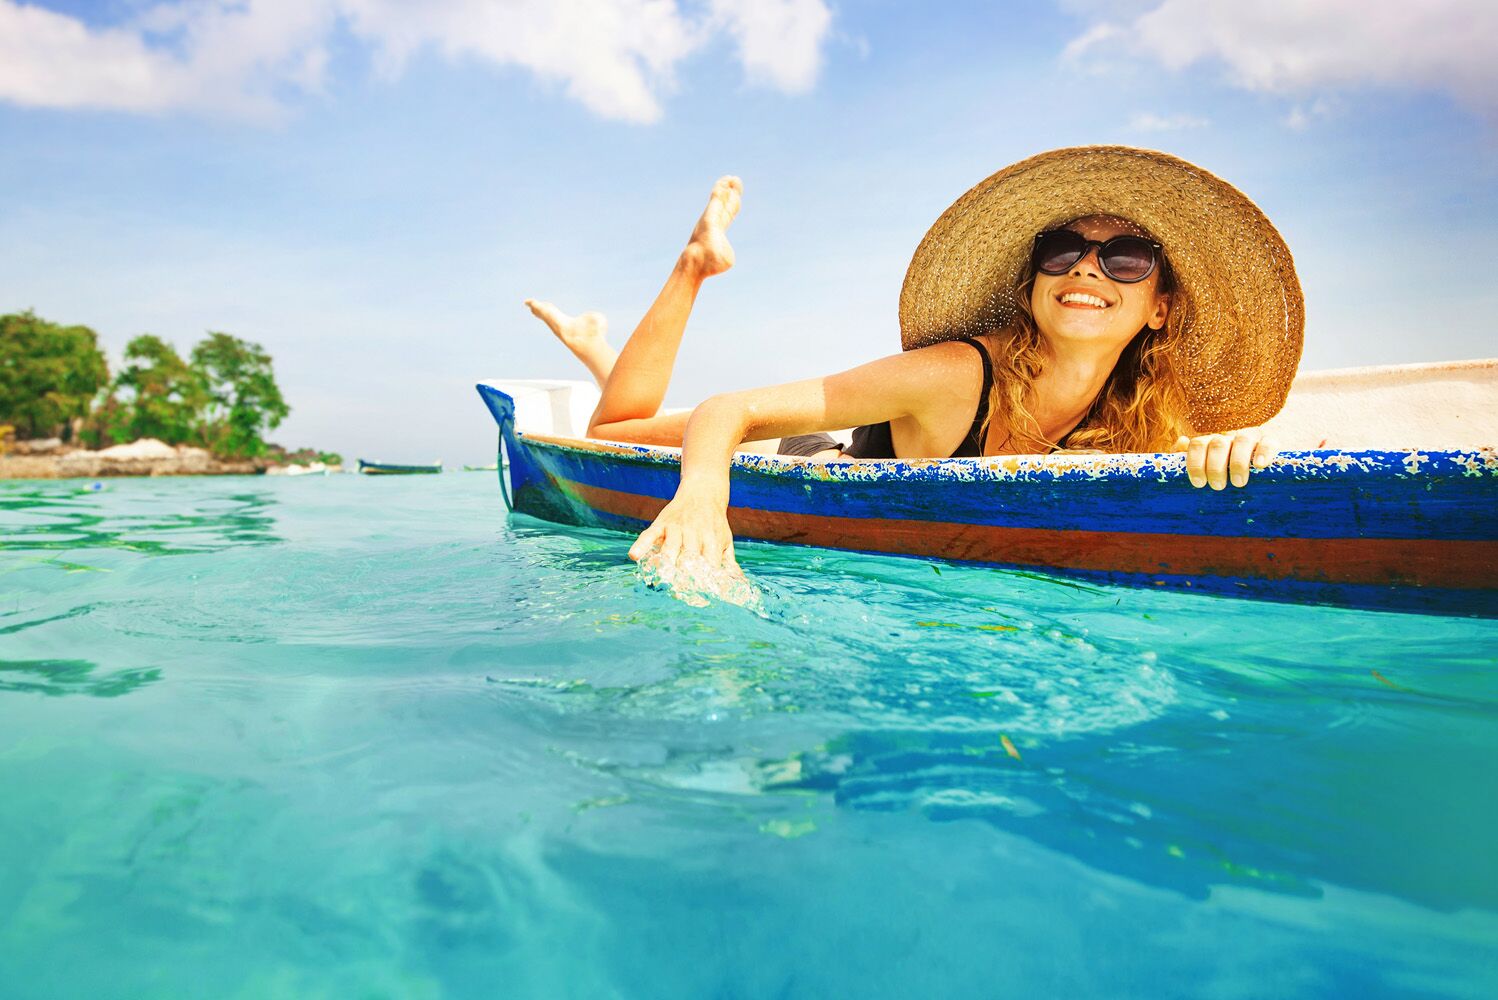 Why Life Experiences® are better than a vacation